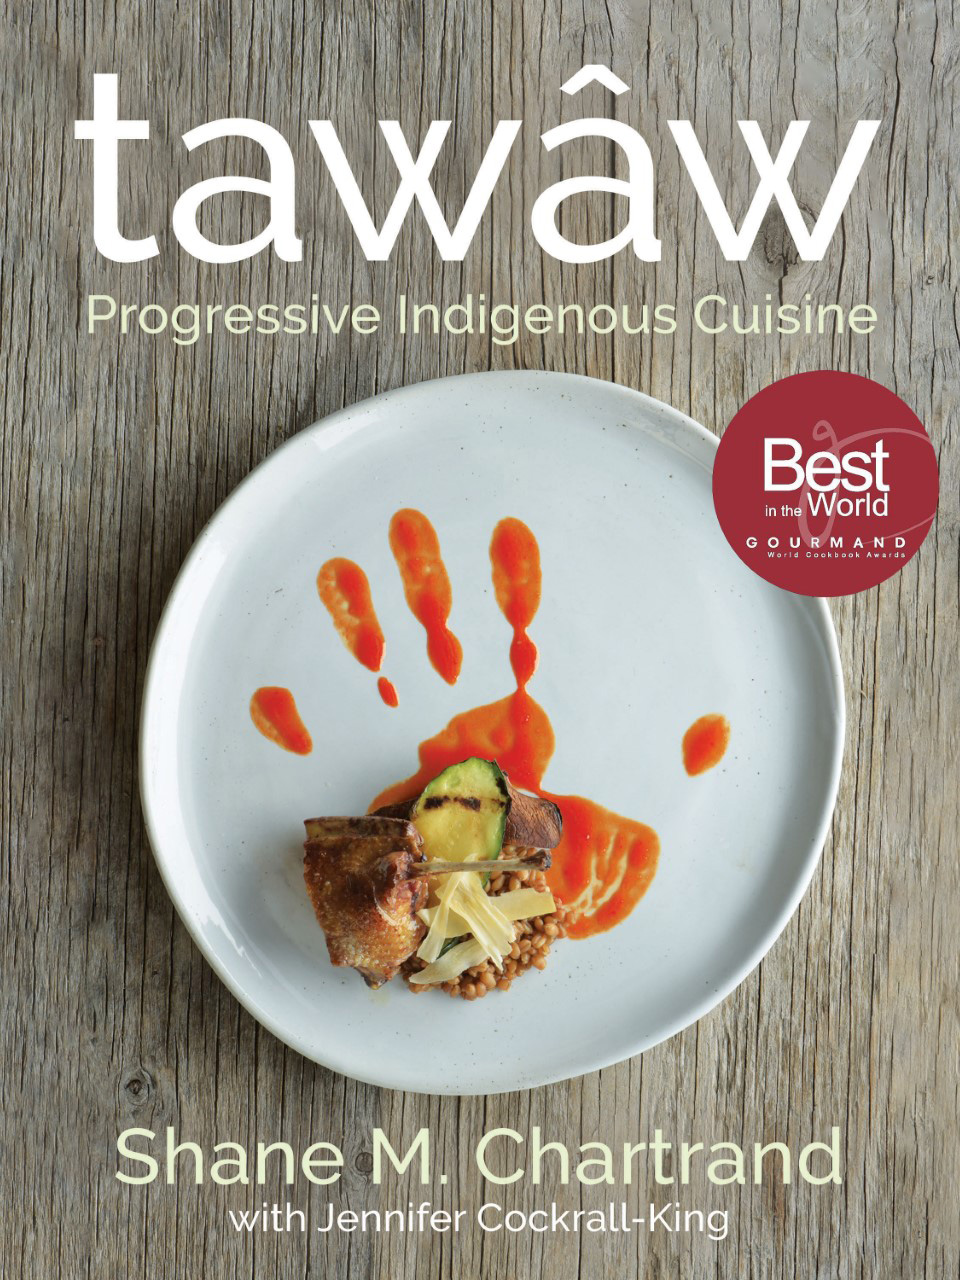 The cover of Chartrand's acclaimed book tataw shows one of the feature dishes on a white plate.